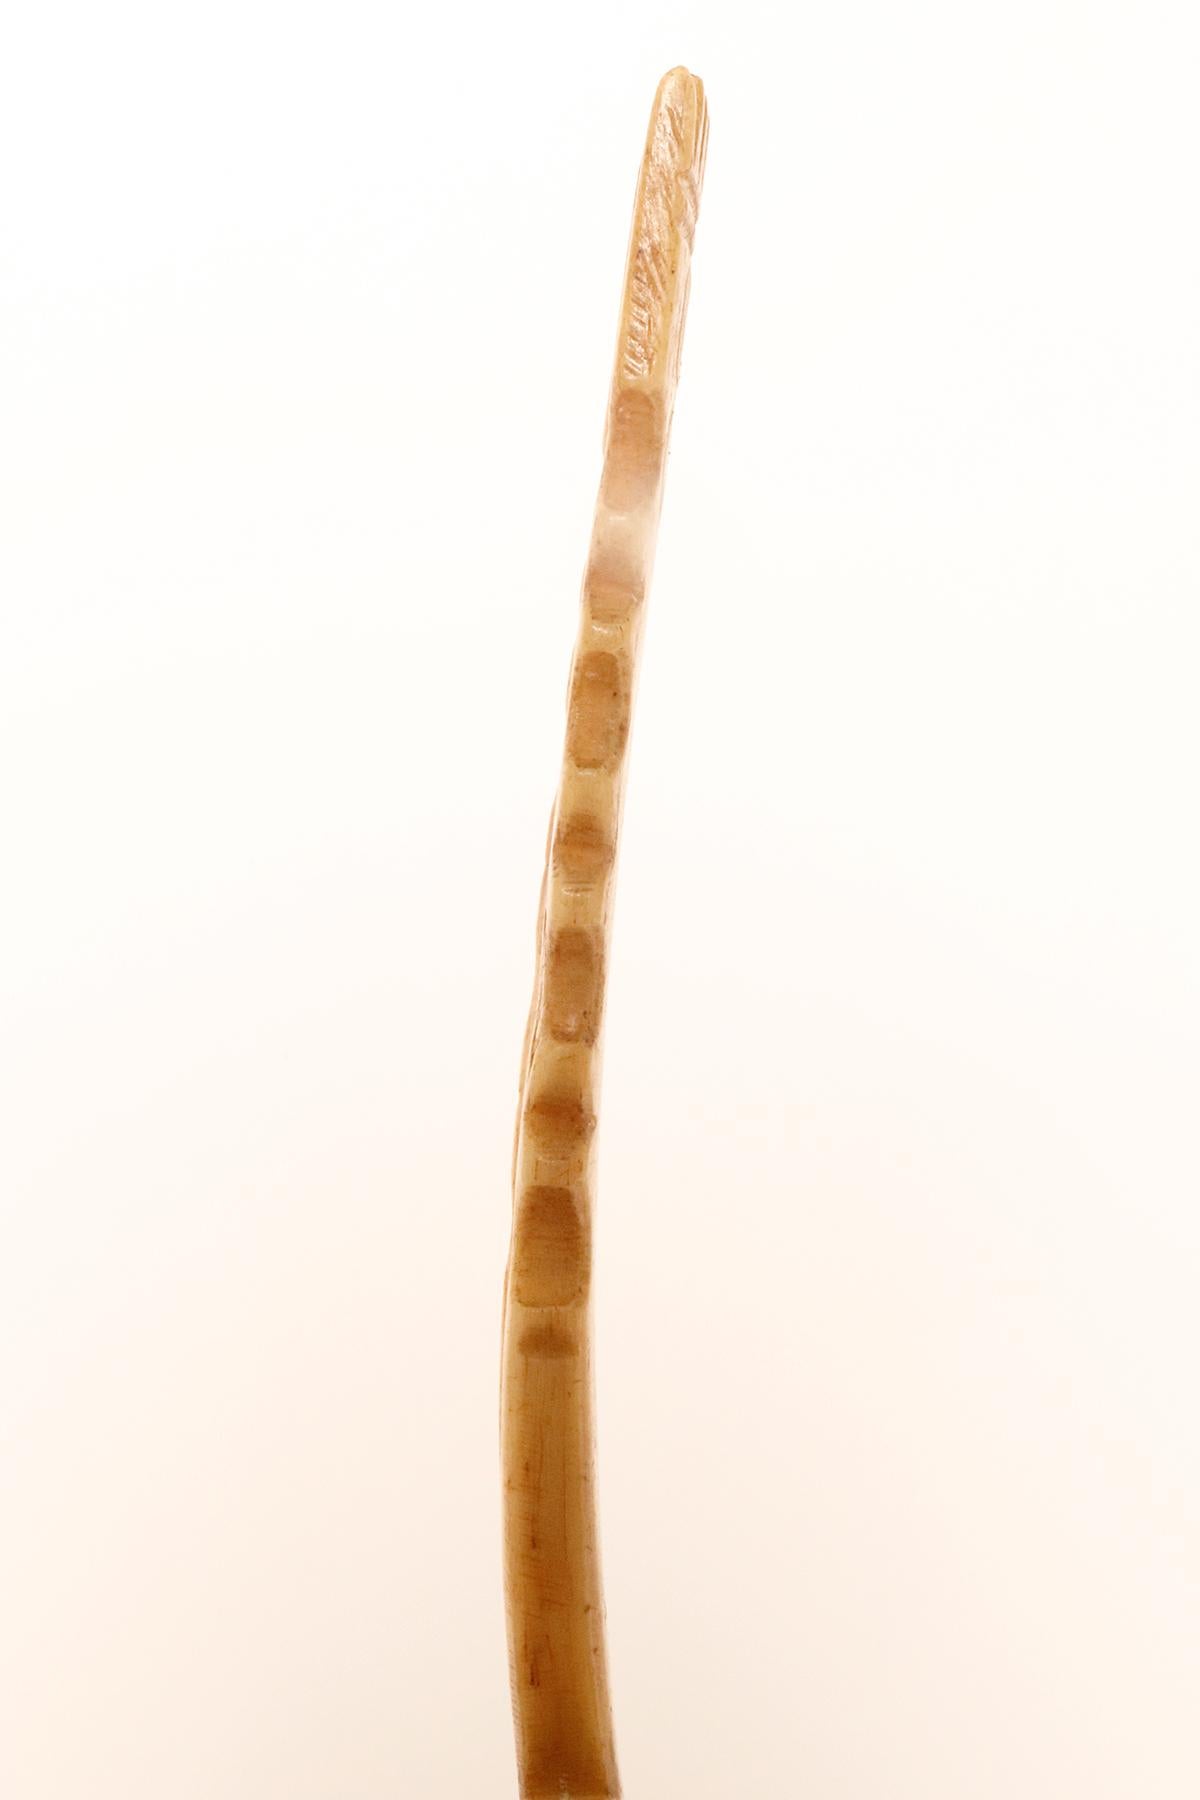 Bone A larkspur, also known as a pastry cutter, made of bone, Italy 18th century. For Sale